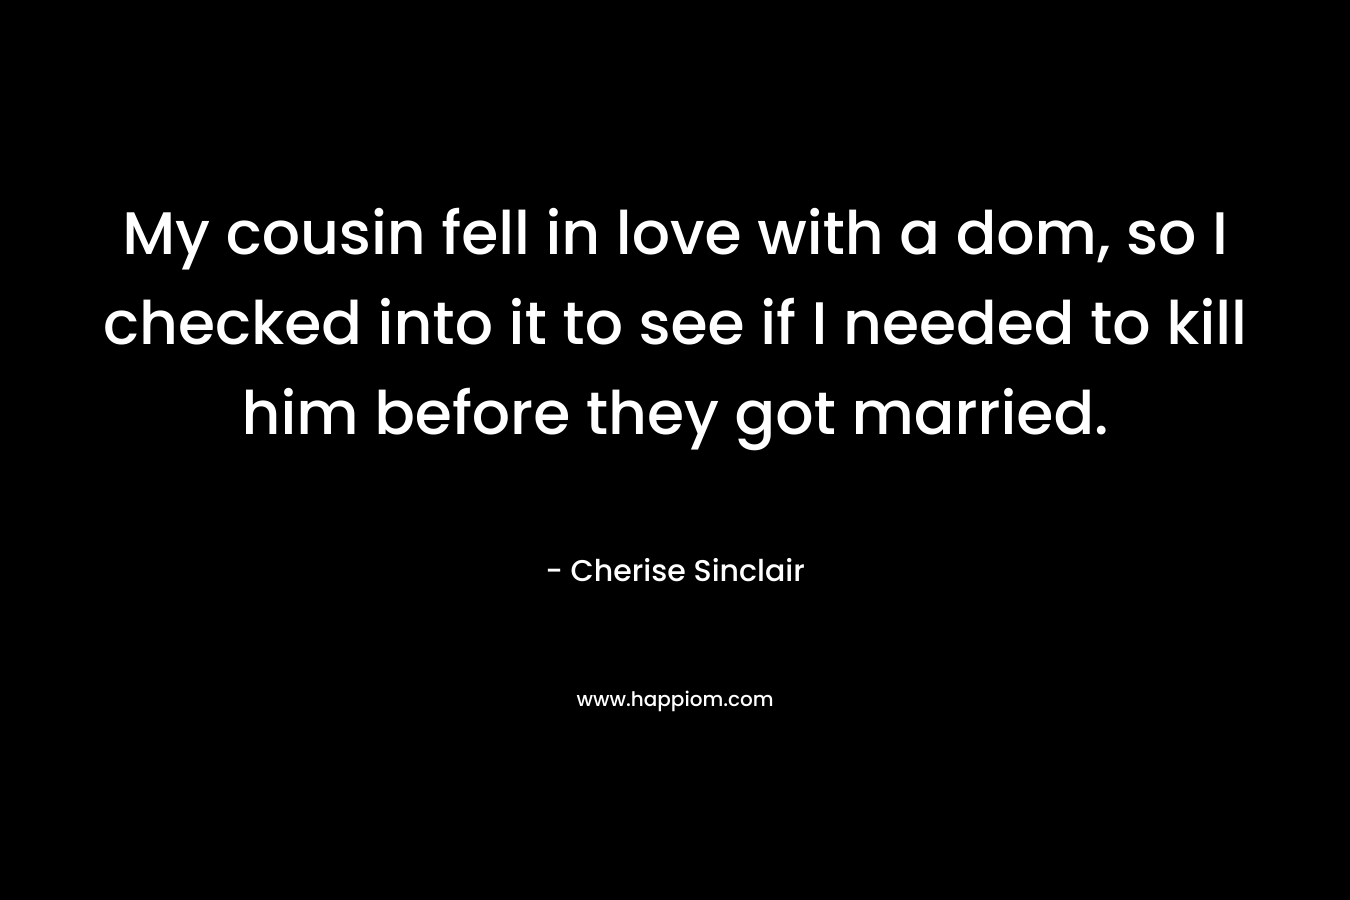 My cousin fell in love with a dom, so I checked into it to see if I needed to kill him before they got married. – Cherise Sinclair